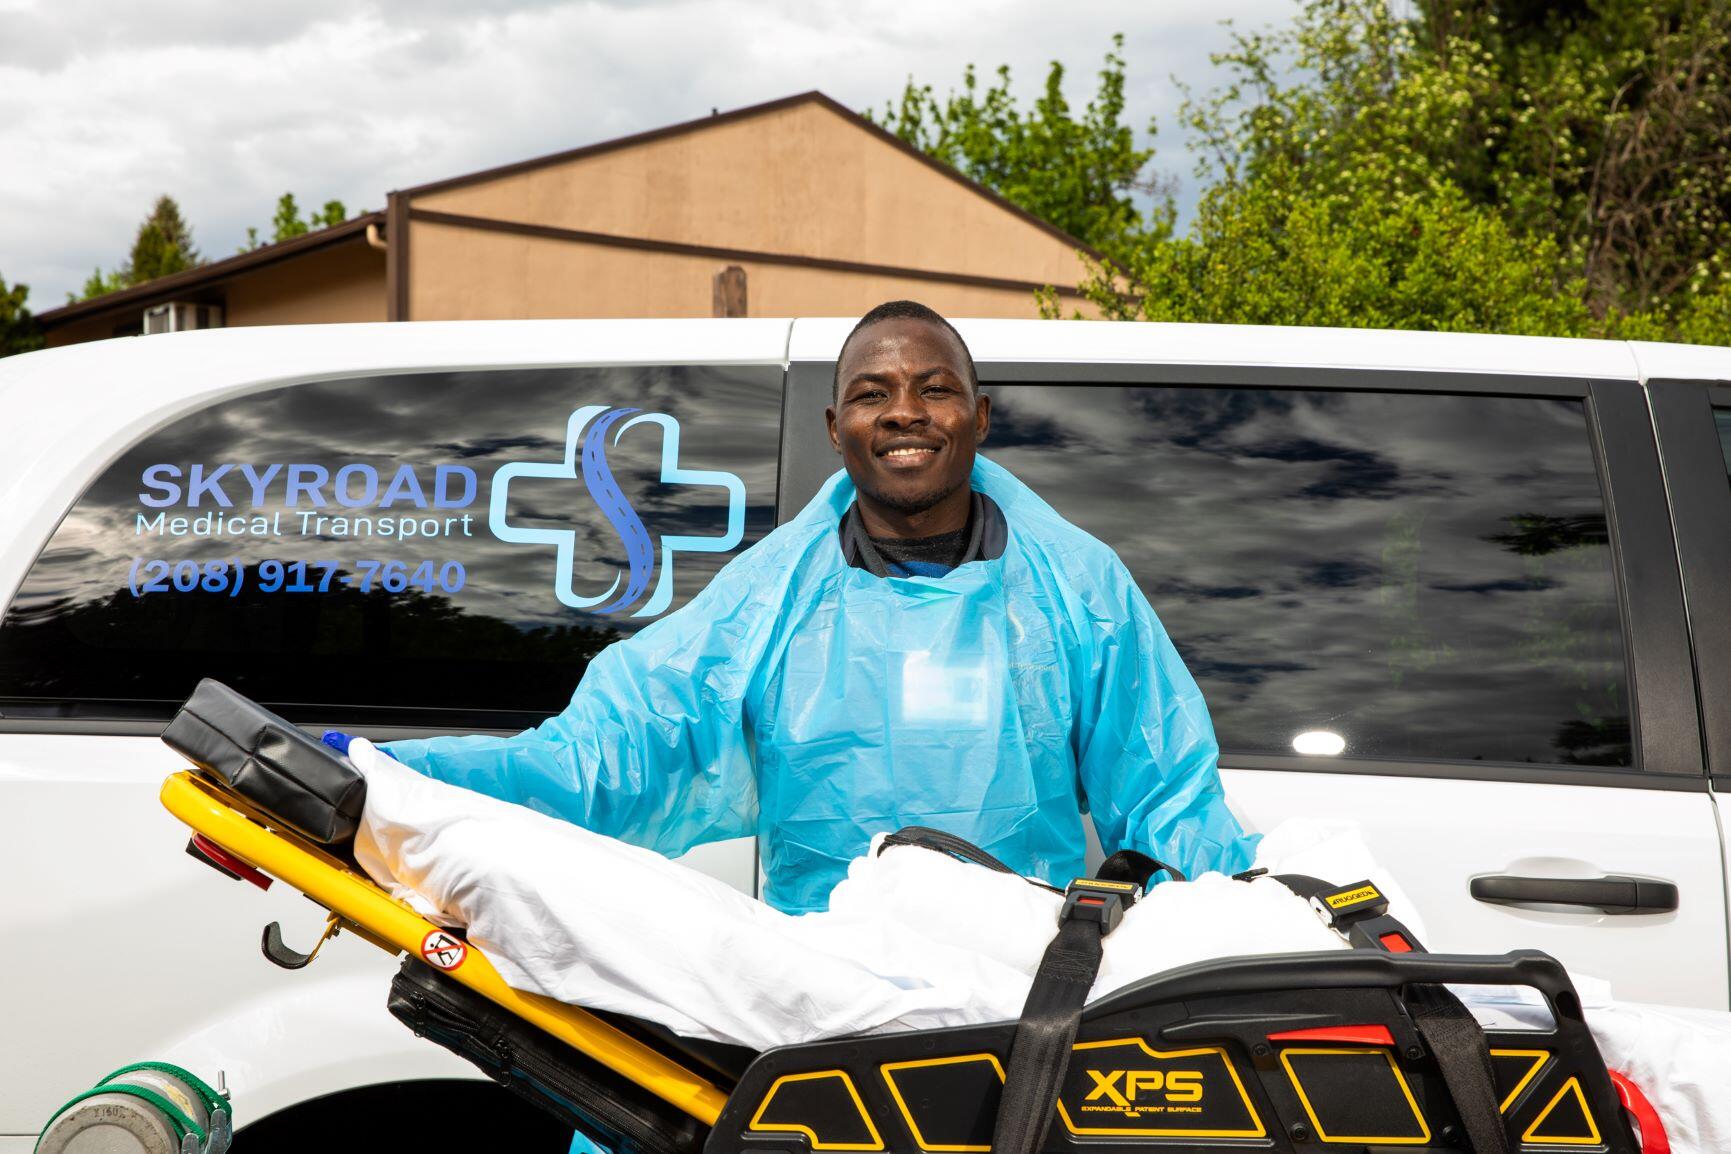 Jonathan Amissa, who owns a medical transport business, poses with a stretcher in front of one of his vans. He is wearing bright blue scrubs. 